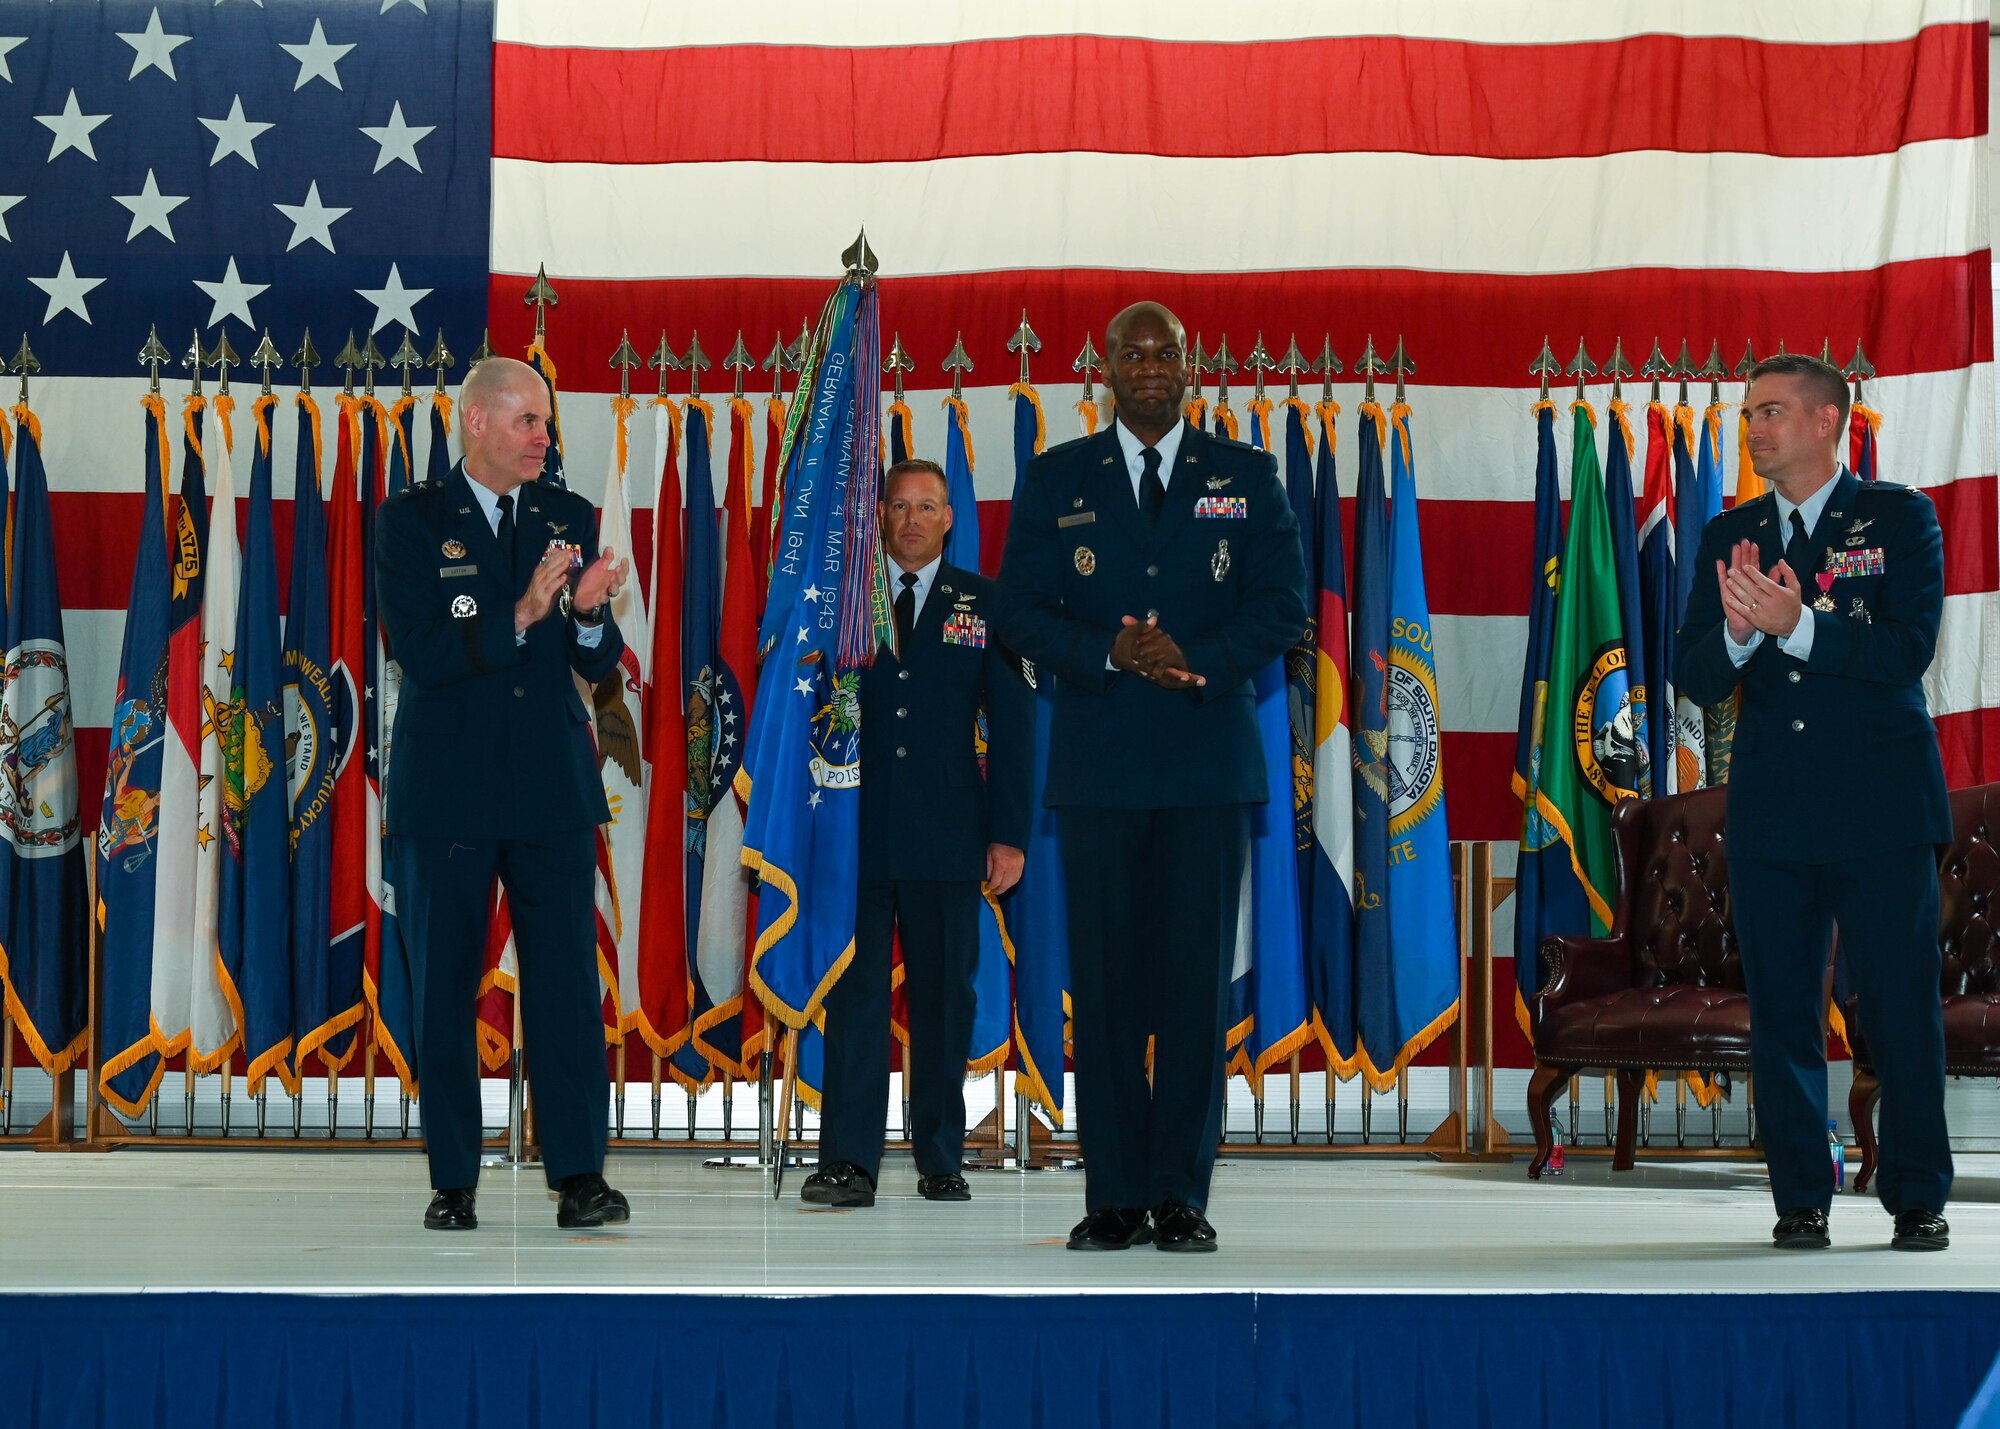 Col. Kenneth McGhee, incoming 91st Missile Wing commander, takes command of the 91st Missile Wing at Minot Air Force Base, North Dakota, June 06, 2022. Consisting of three groups, the 91st Operations Group, 91st Maintenance Group and 91st Security Forces Group, the 91st Missile Wing has approximately 1,800 professionals working together to keep Minuteman missiles on alert. (U.S. Air Force photo by Airman 1st Class Evan J. Lichtenhan)